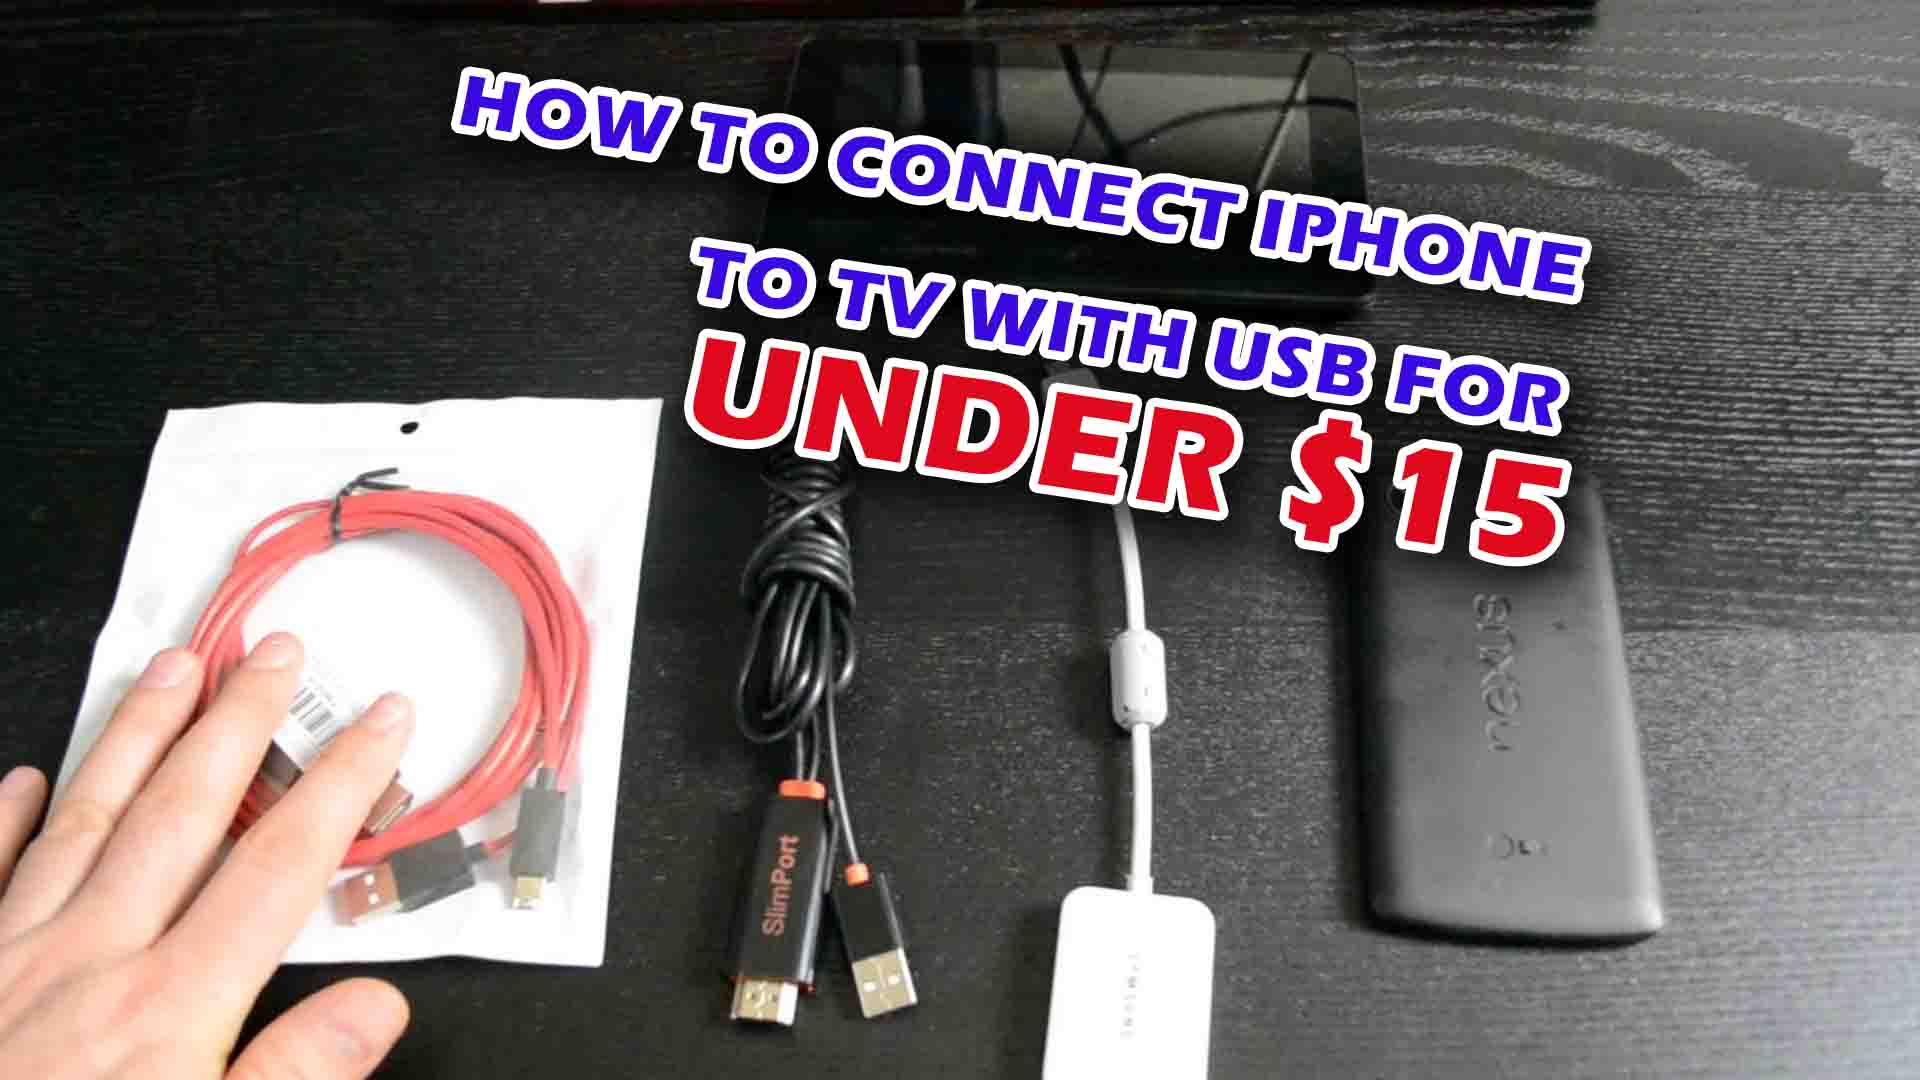 How to Connect iPhone to TV with USB for Under $15